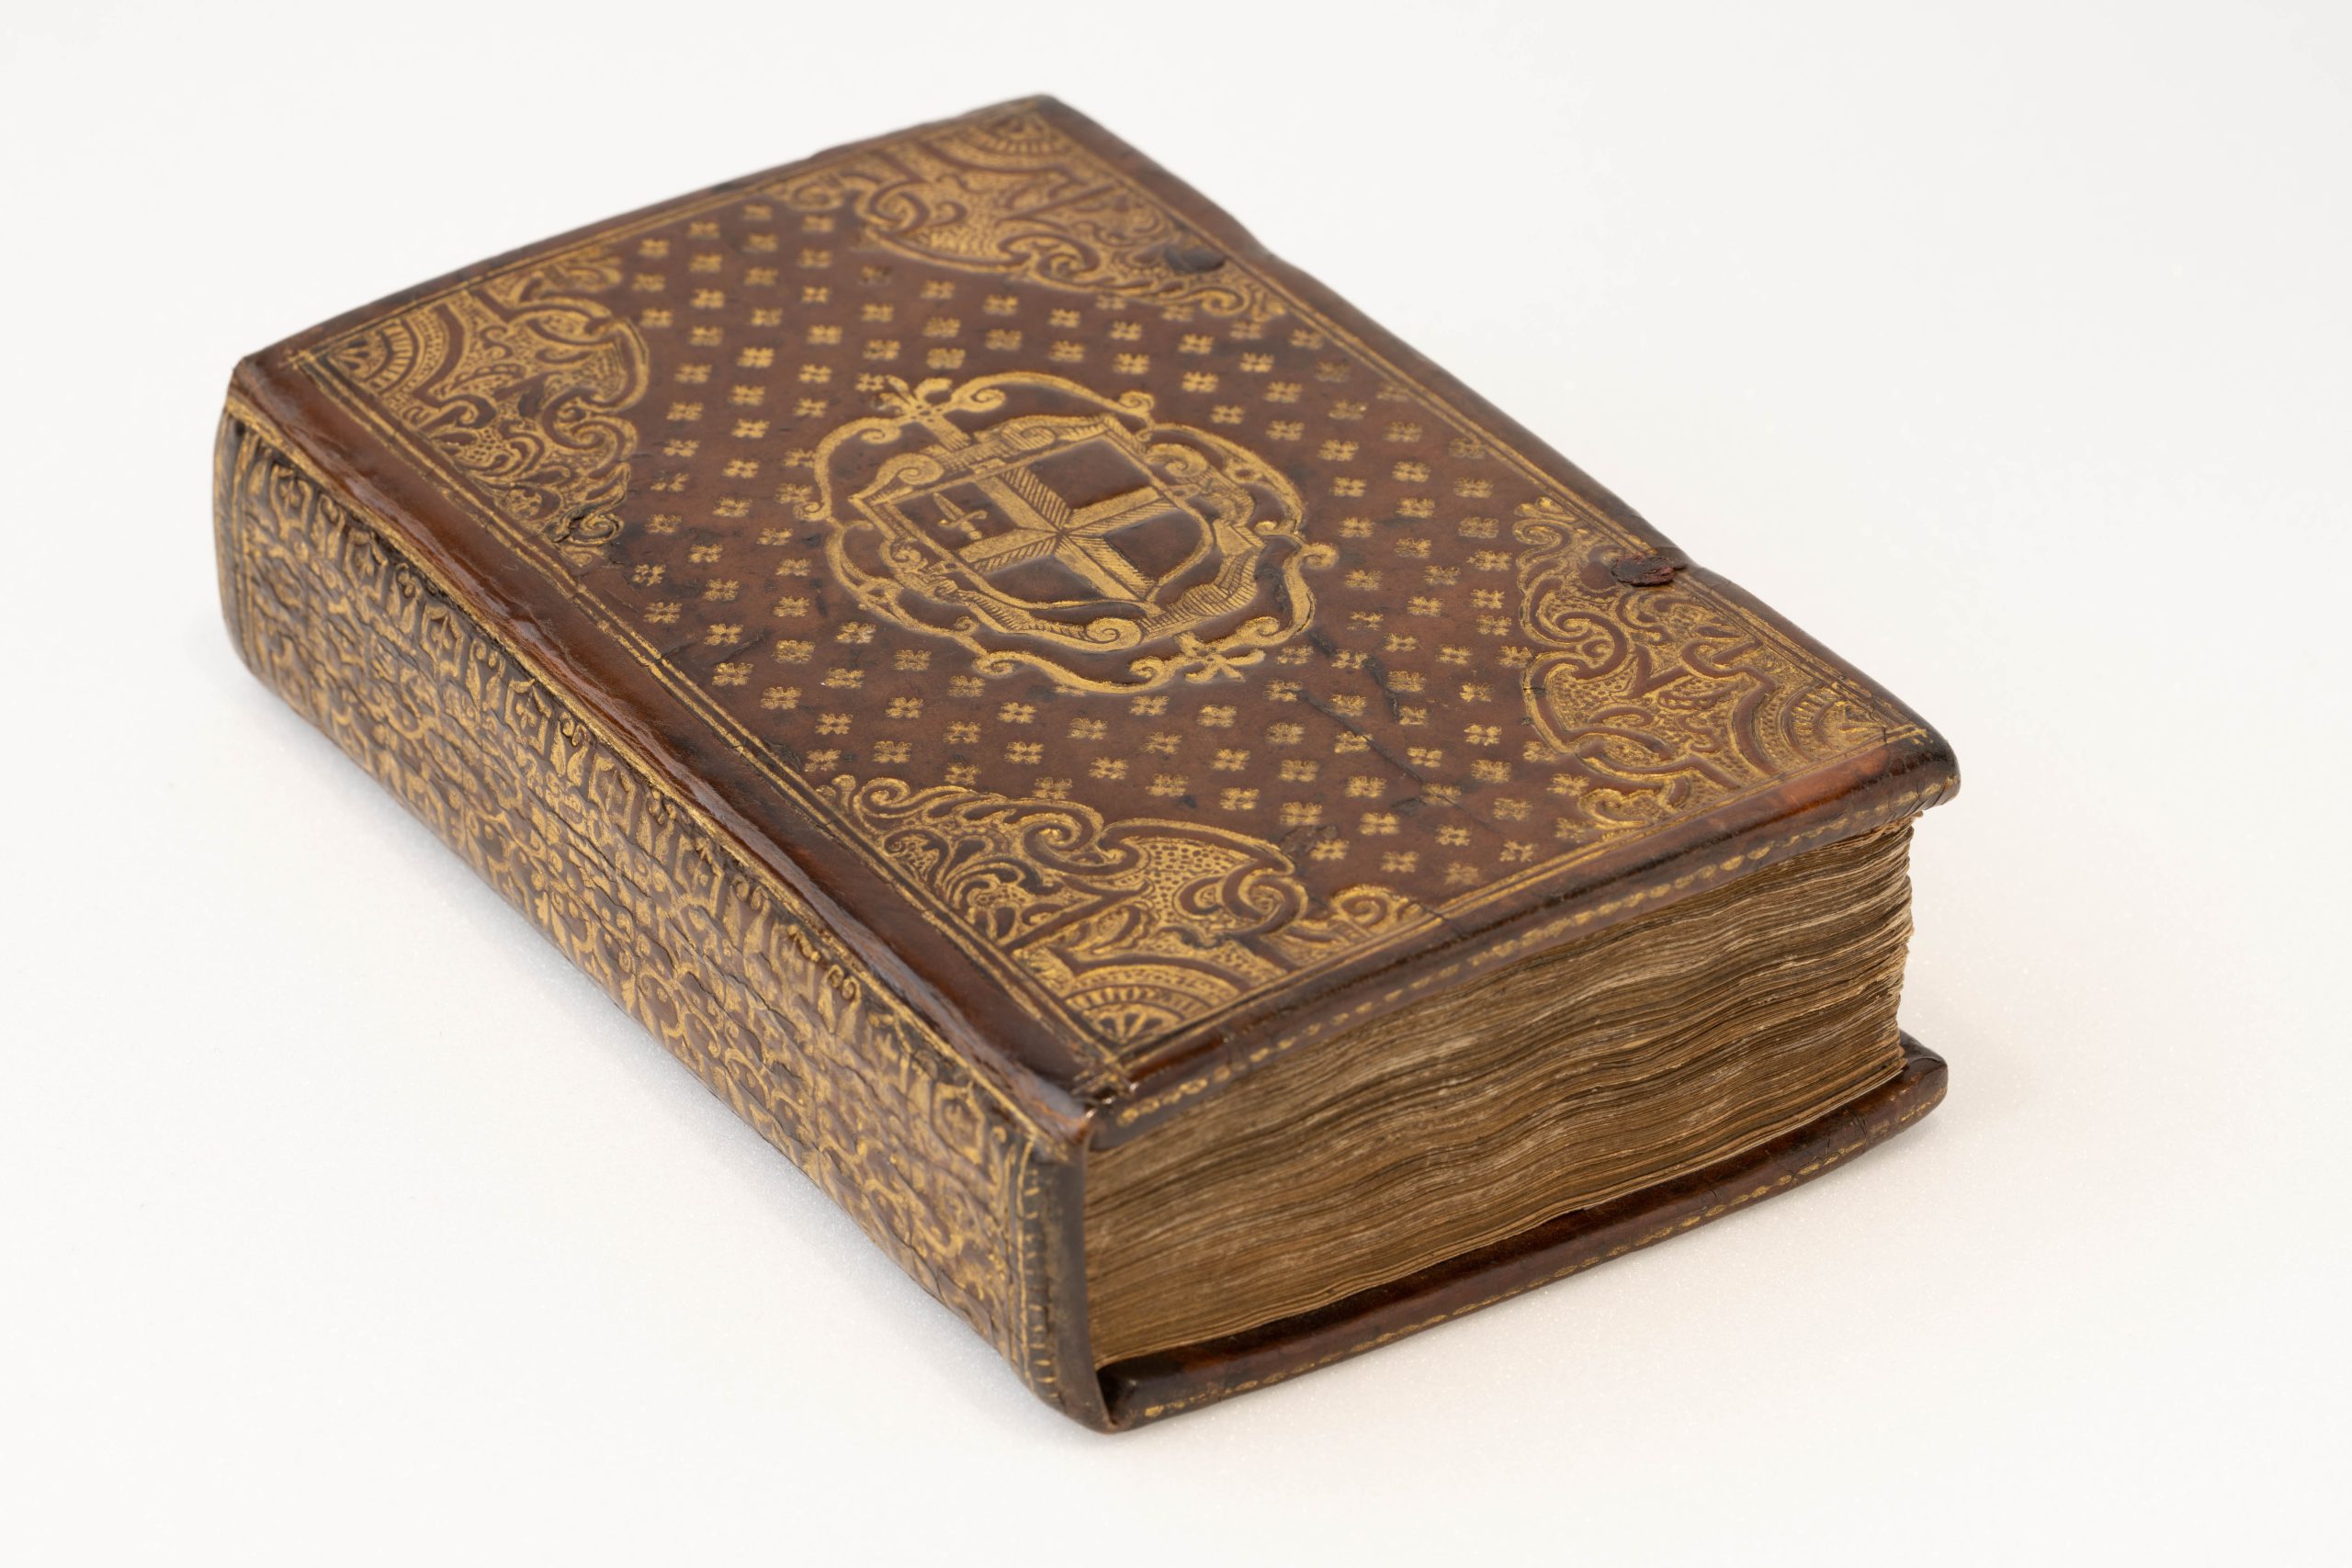 Photograph of a rare book with gilded decorations.